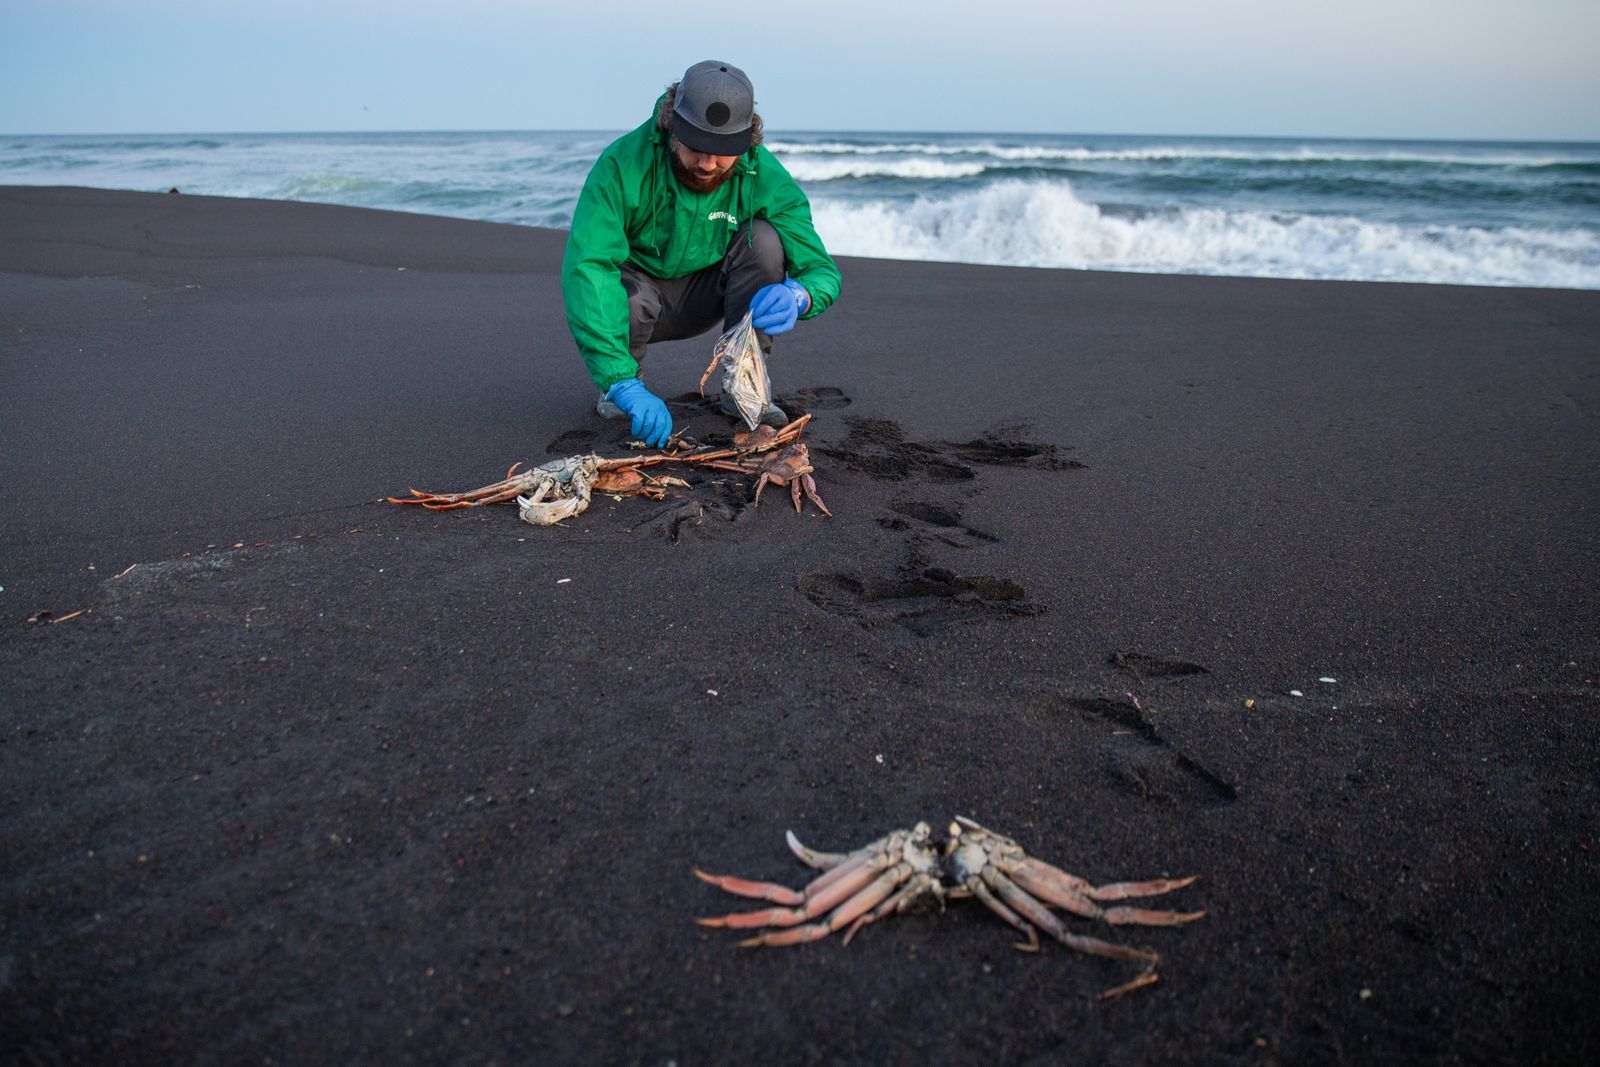 Hundreds of Dead Animals Wash Ashore on Russian Beach After Reports of  Mysterious, Toxic Sludge | Smart News| Smithsonian Magazine